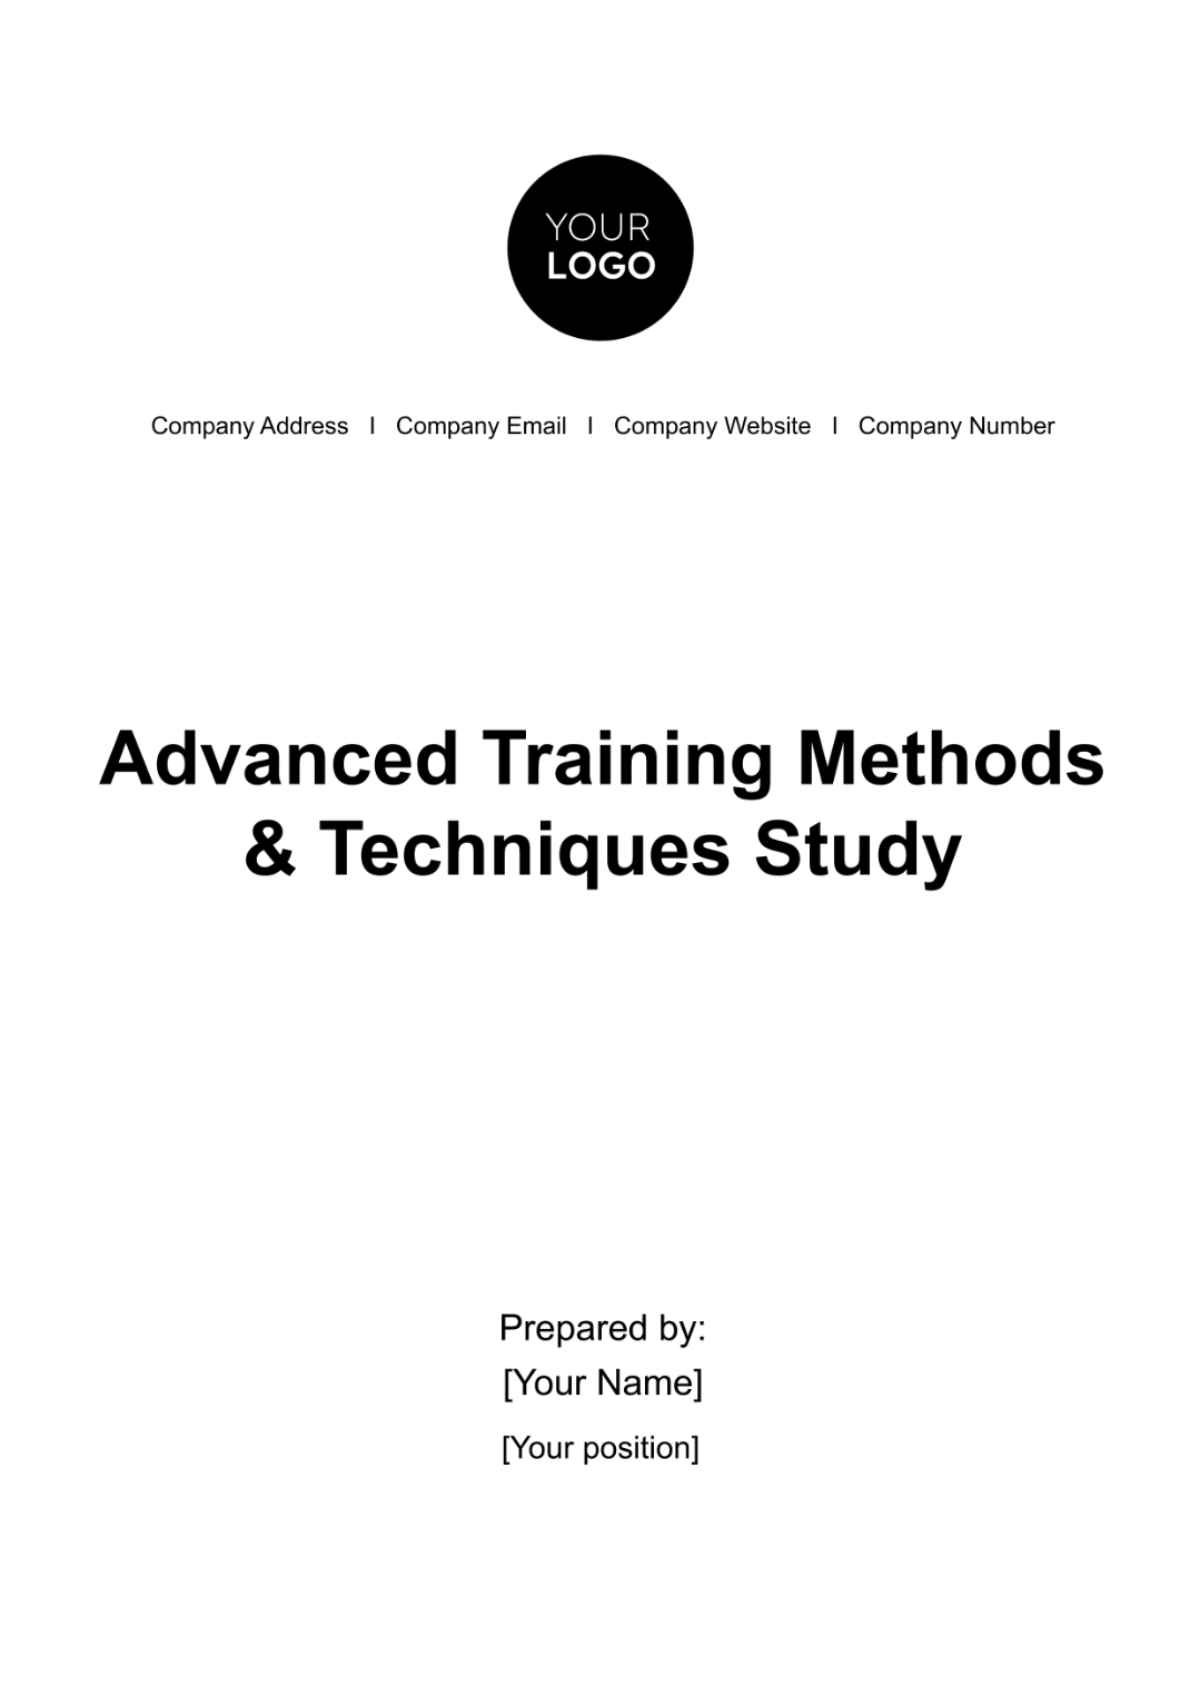 Free Advanced Training Methods & Techniques Study HR Template